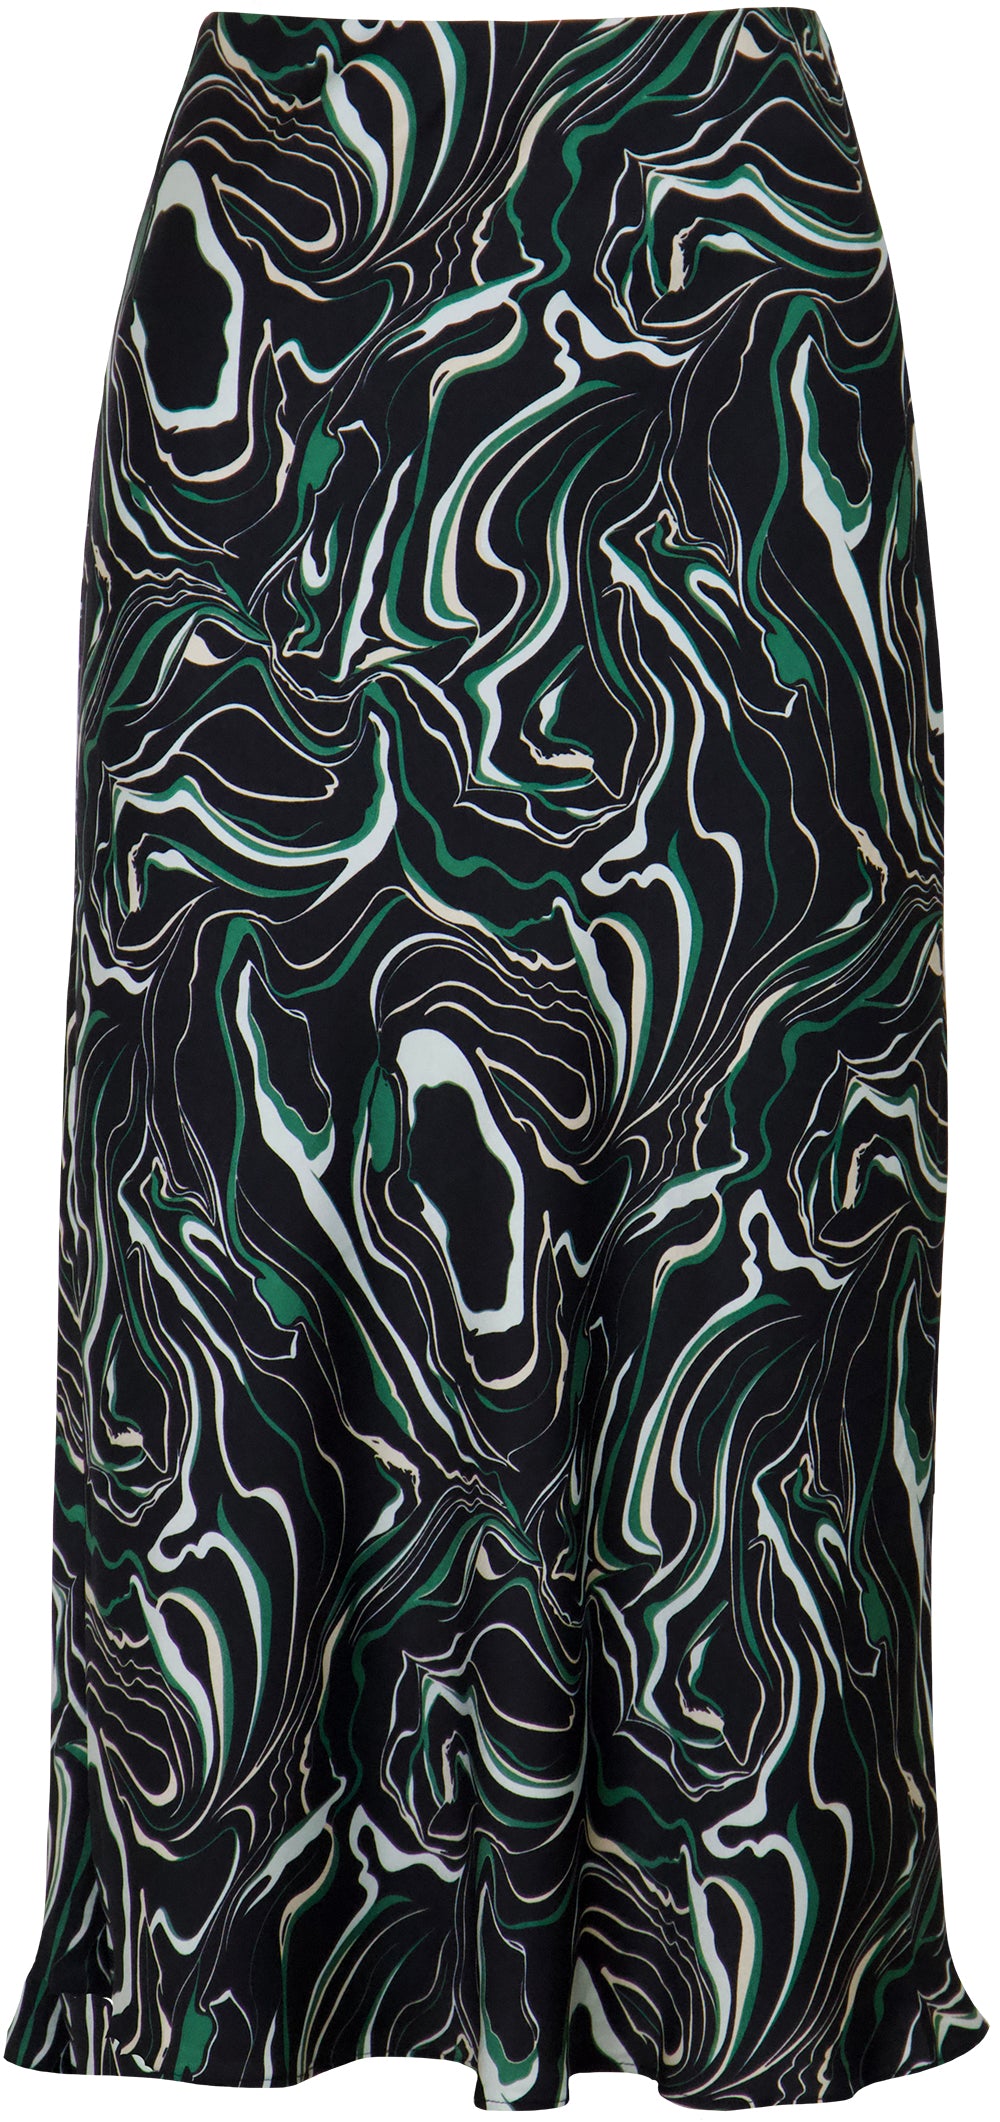 Black Skirt with Green and White Print